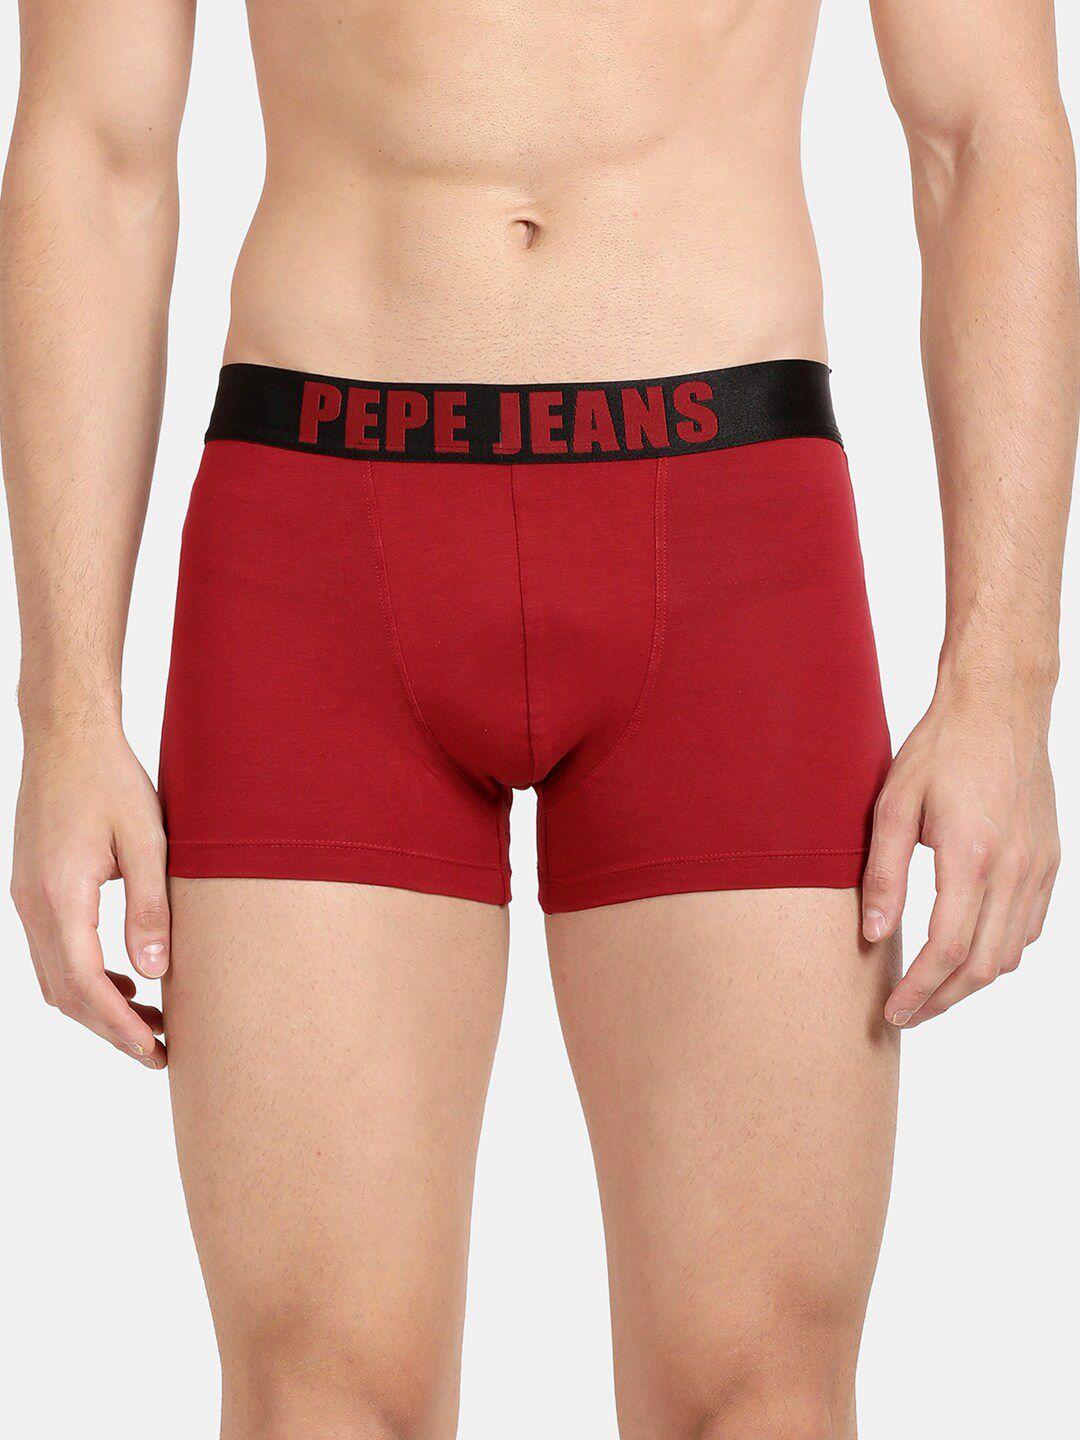 pepe jeans men red solid cotton trunk